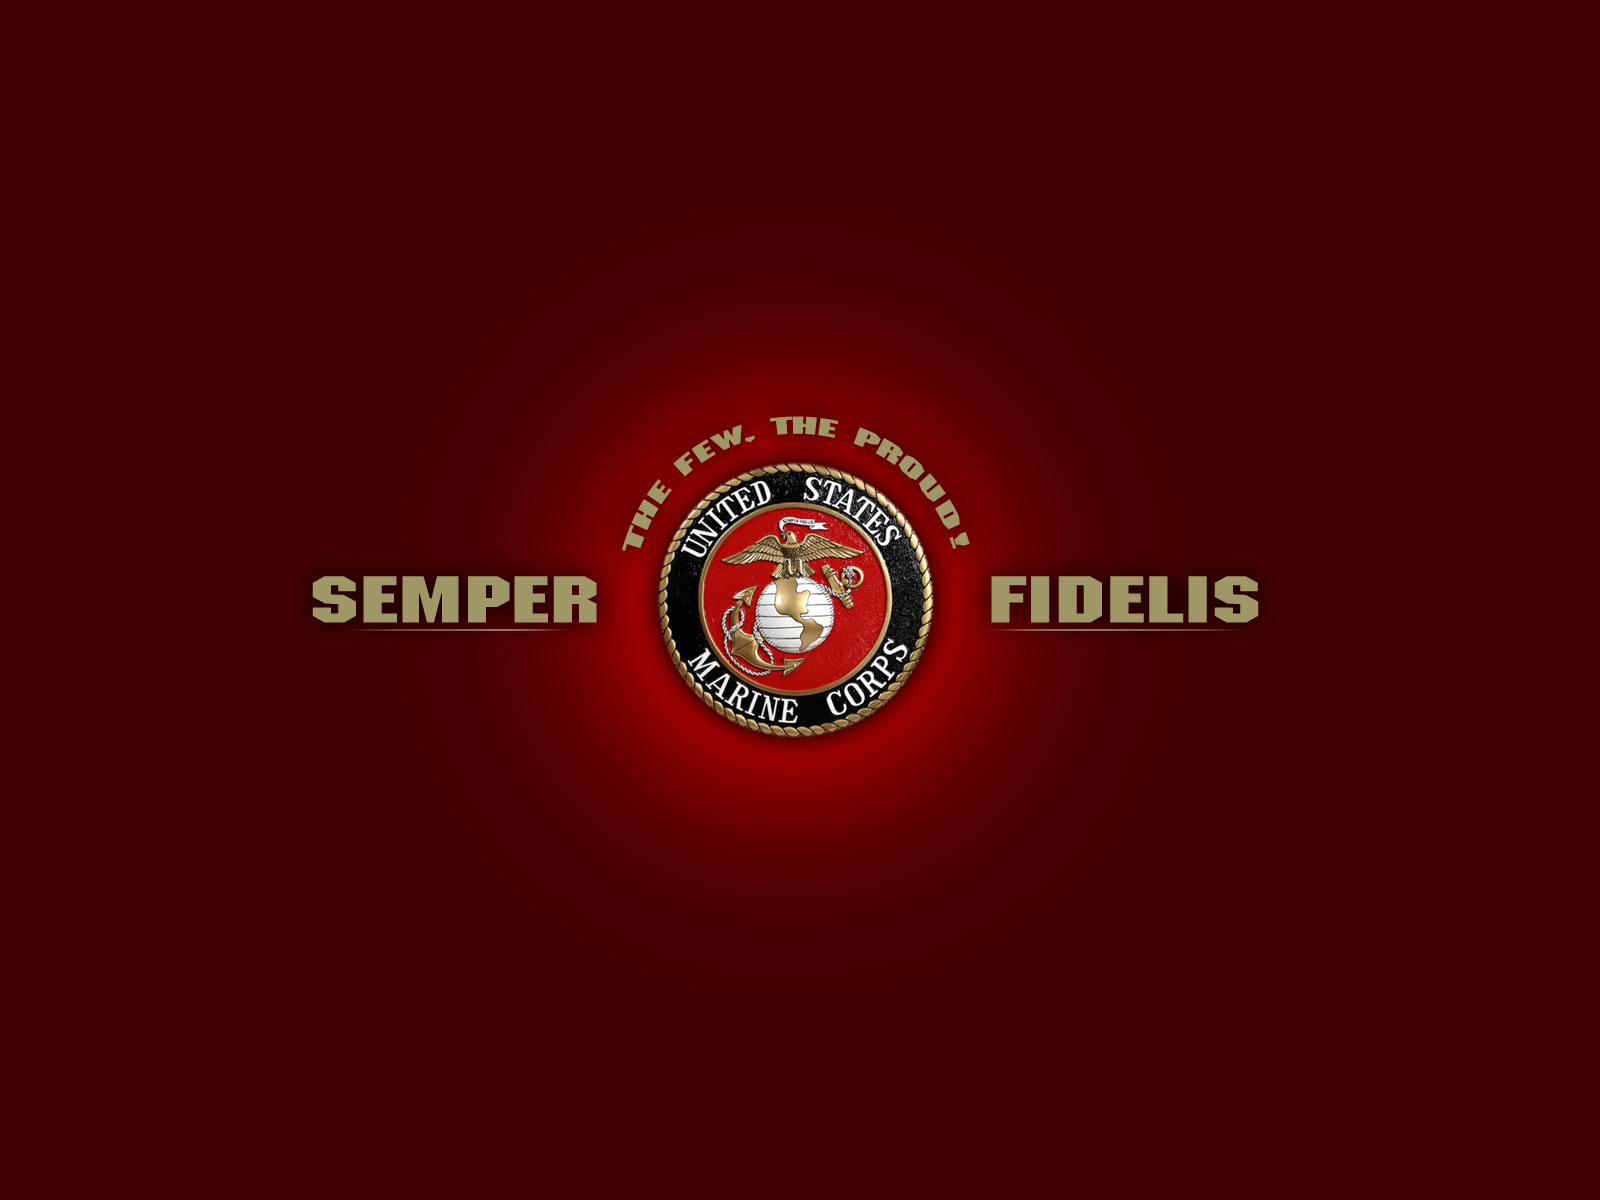 United States Marine Corps Wallpapers